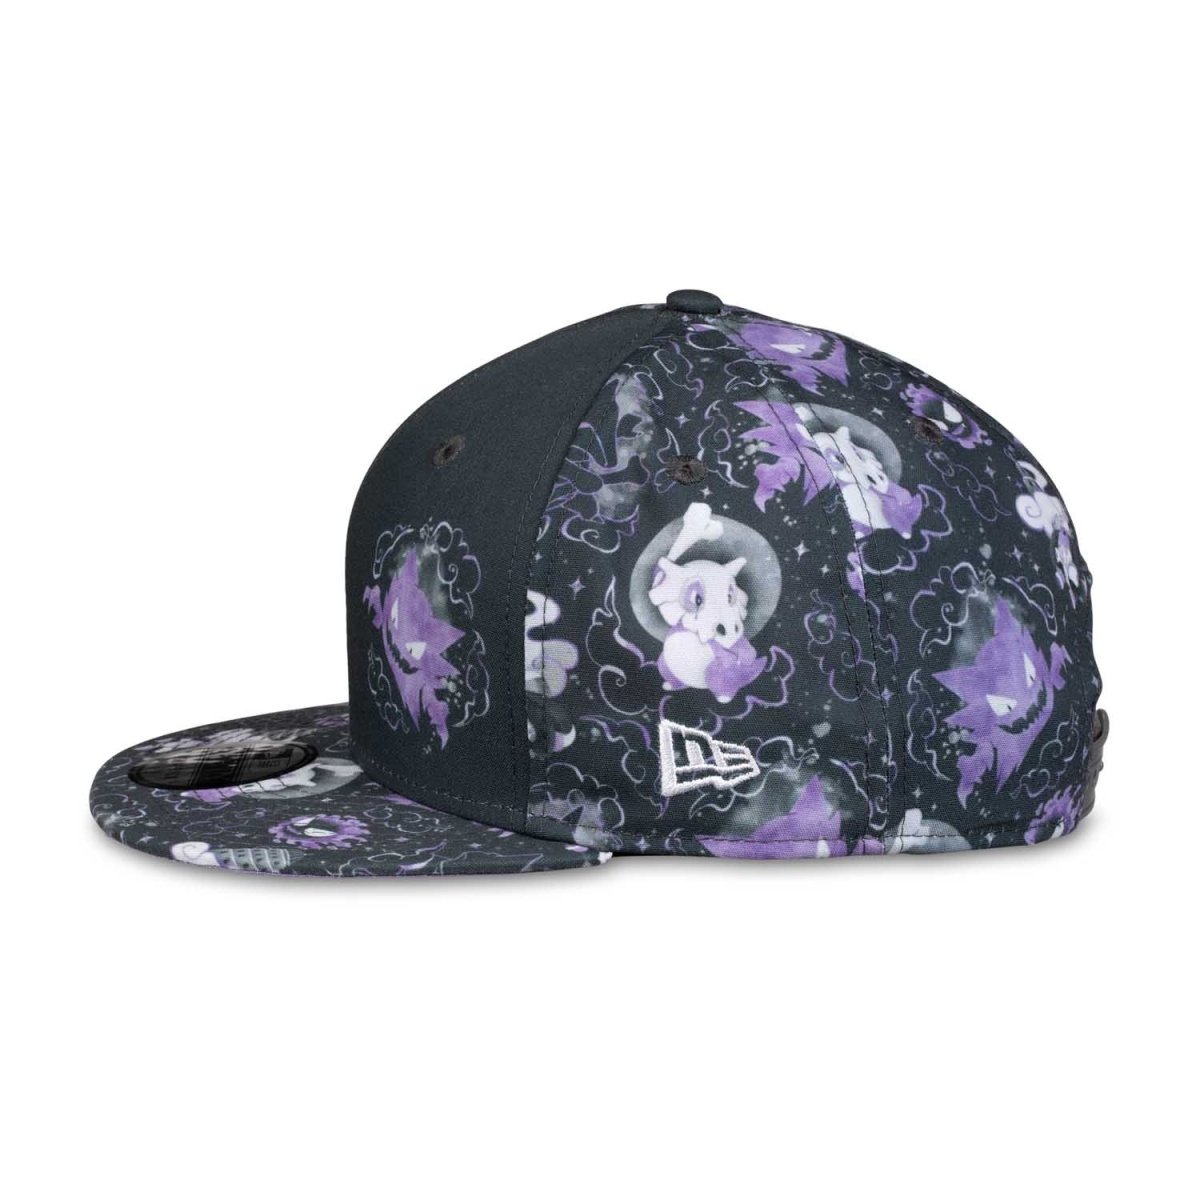 Lavender Town 9FIFTY Baseball Cap by New Era (One Size-Adult)